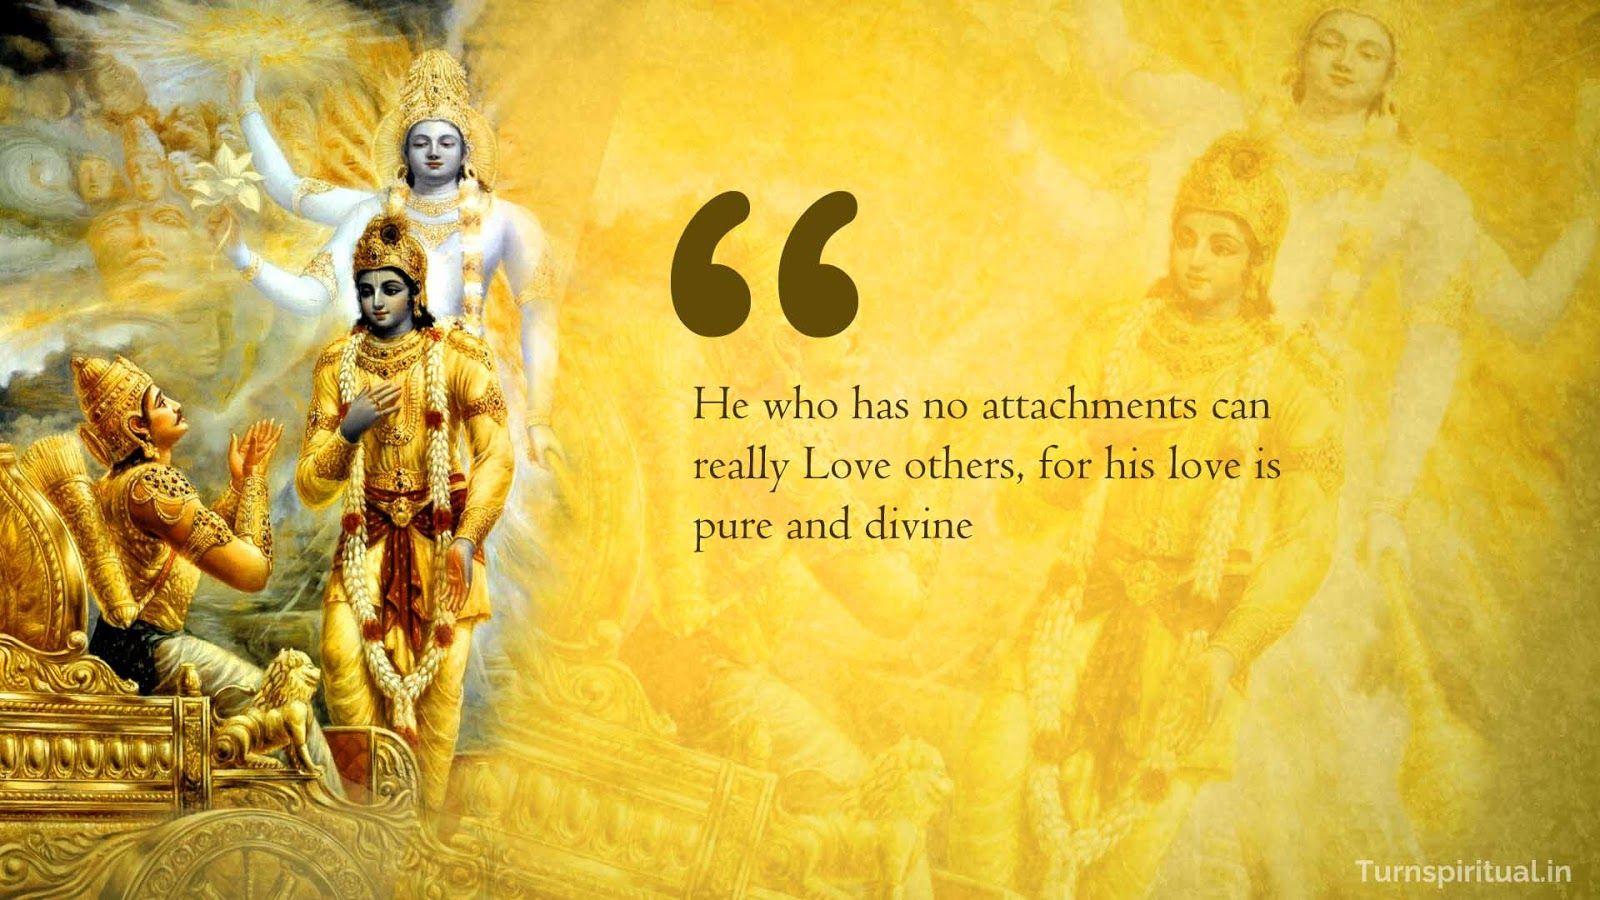 Gita Jayanti 2022 Images and HD Wallpapers for Free Download Online: Share  WhatsApp Messages, Wishes and Greetings To Celebrate Gita Mahotsav | 🙏🏻  LatestLY